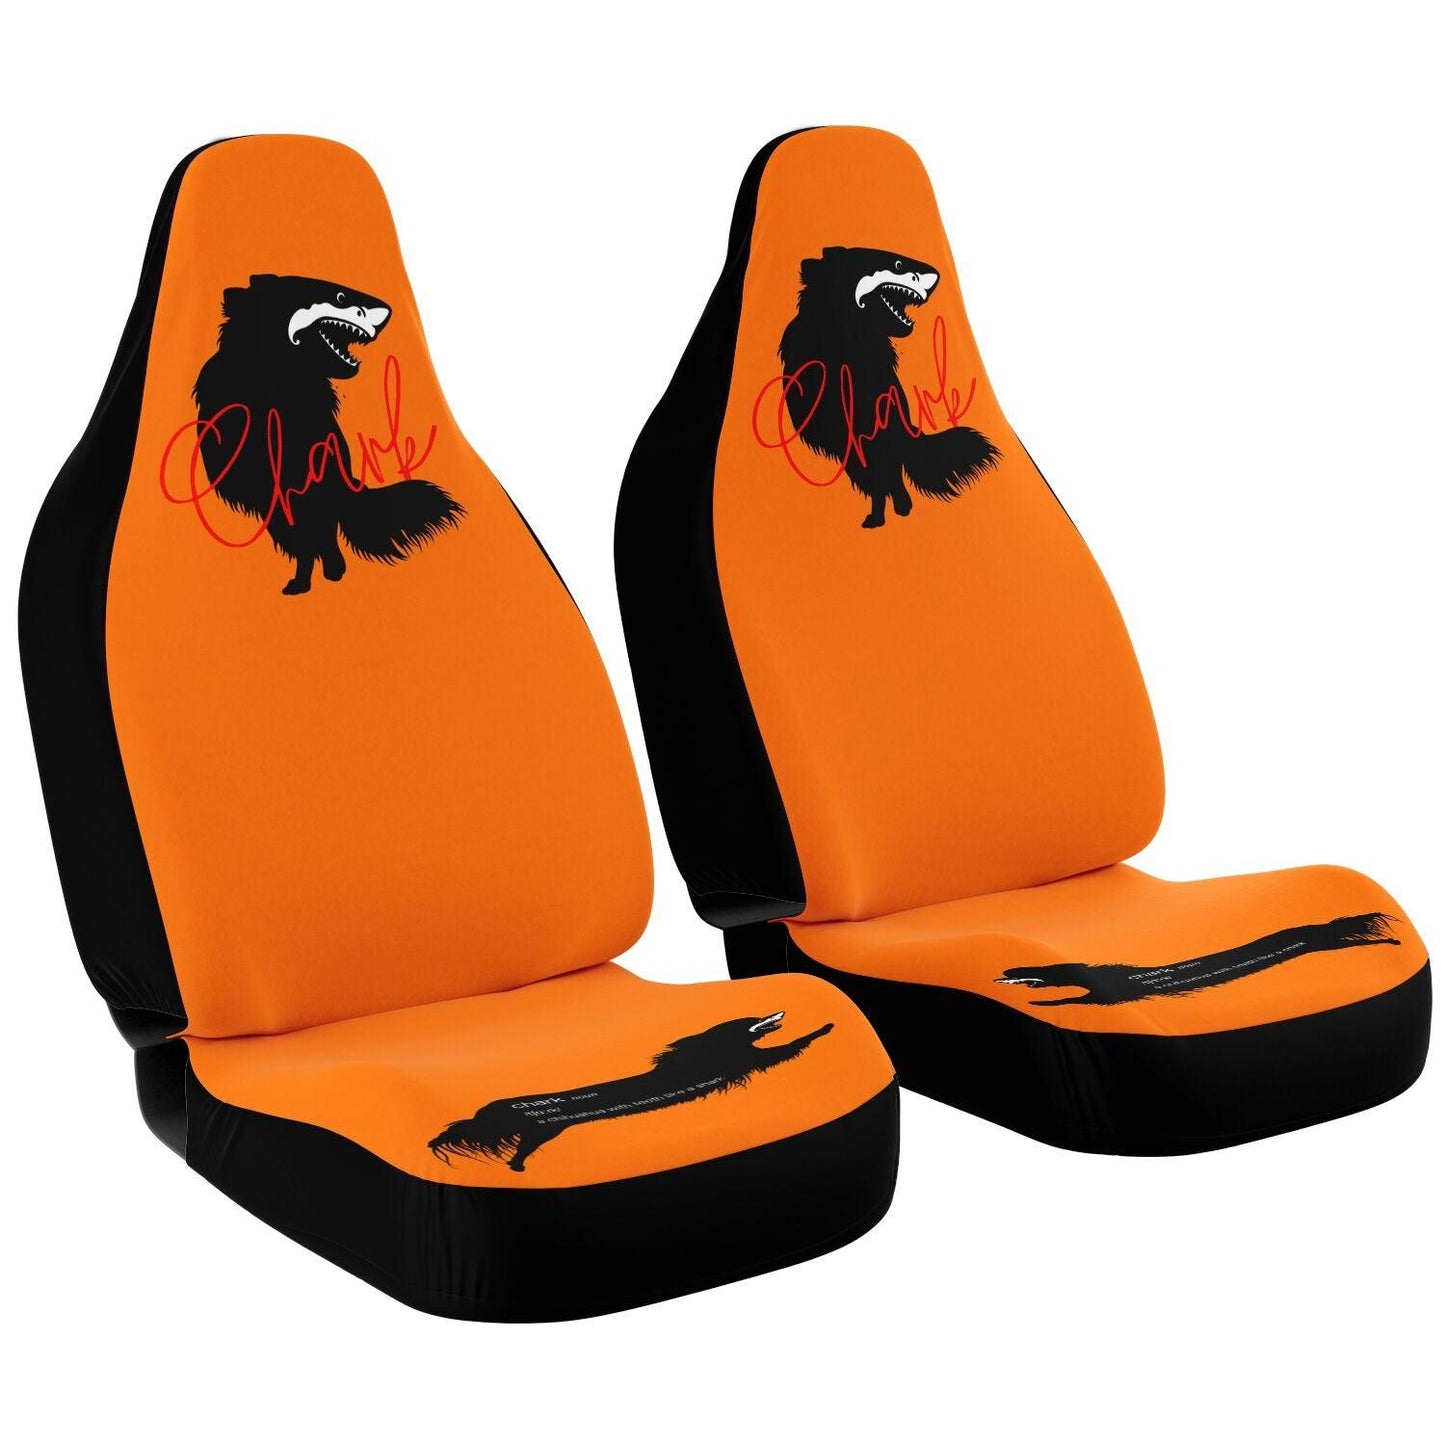 This punky pair of rally orange front car seat covers feature the silhouette of a black longhair chihuahua with the face of a great white shark - mouth open to show off jaws lined with sharp teeth. The word "Chark" is artfully placed in red cursive font over the image. The seat fronts feature another shark-faced chihuahua, and a "dictionary entry" of the noun "chark": a chihuahua with teeth like a shark. Design by Renate Kriegler for Chimigos.